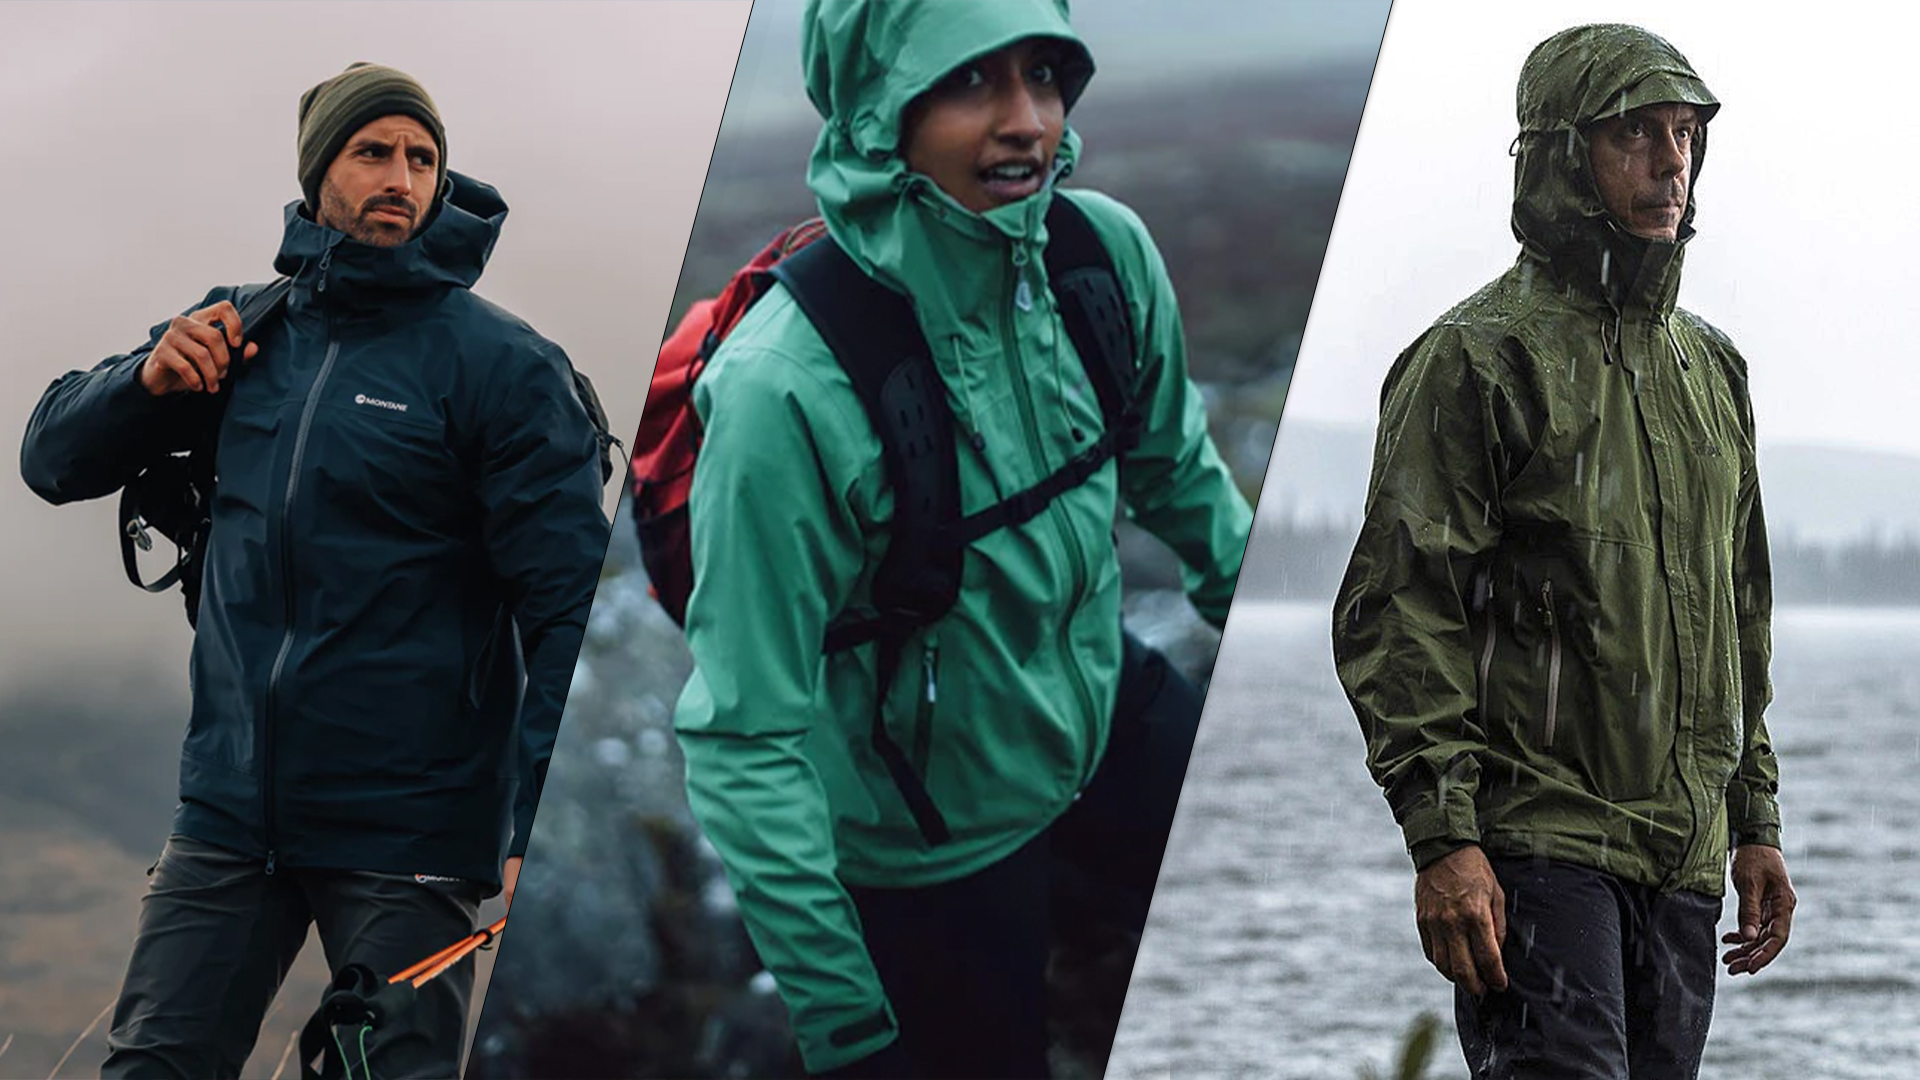 Best Waterproof Jacket 2023 - the Top UK Shells Tested and Rated